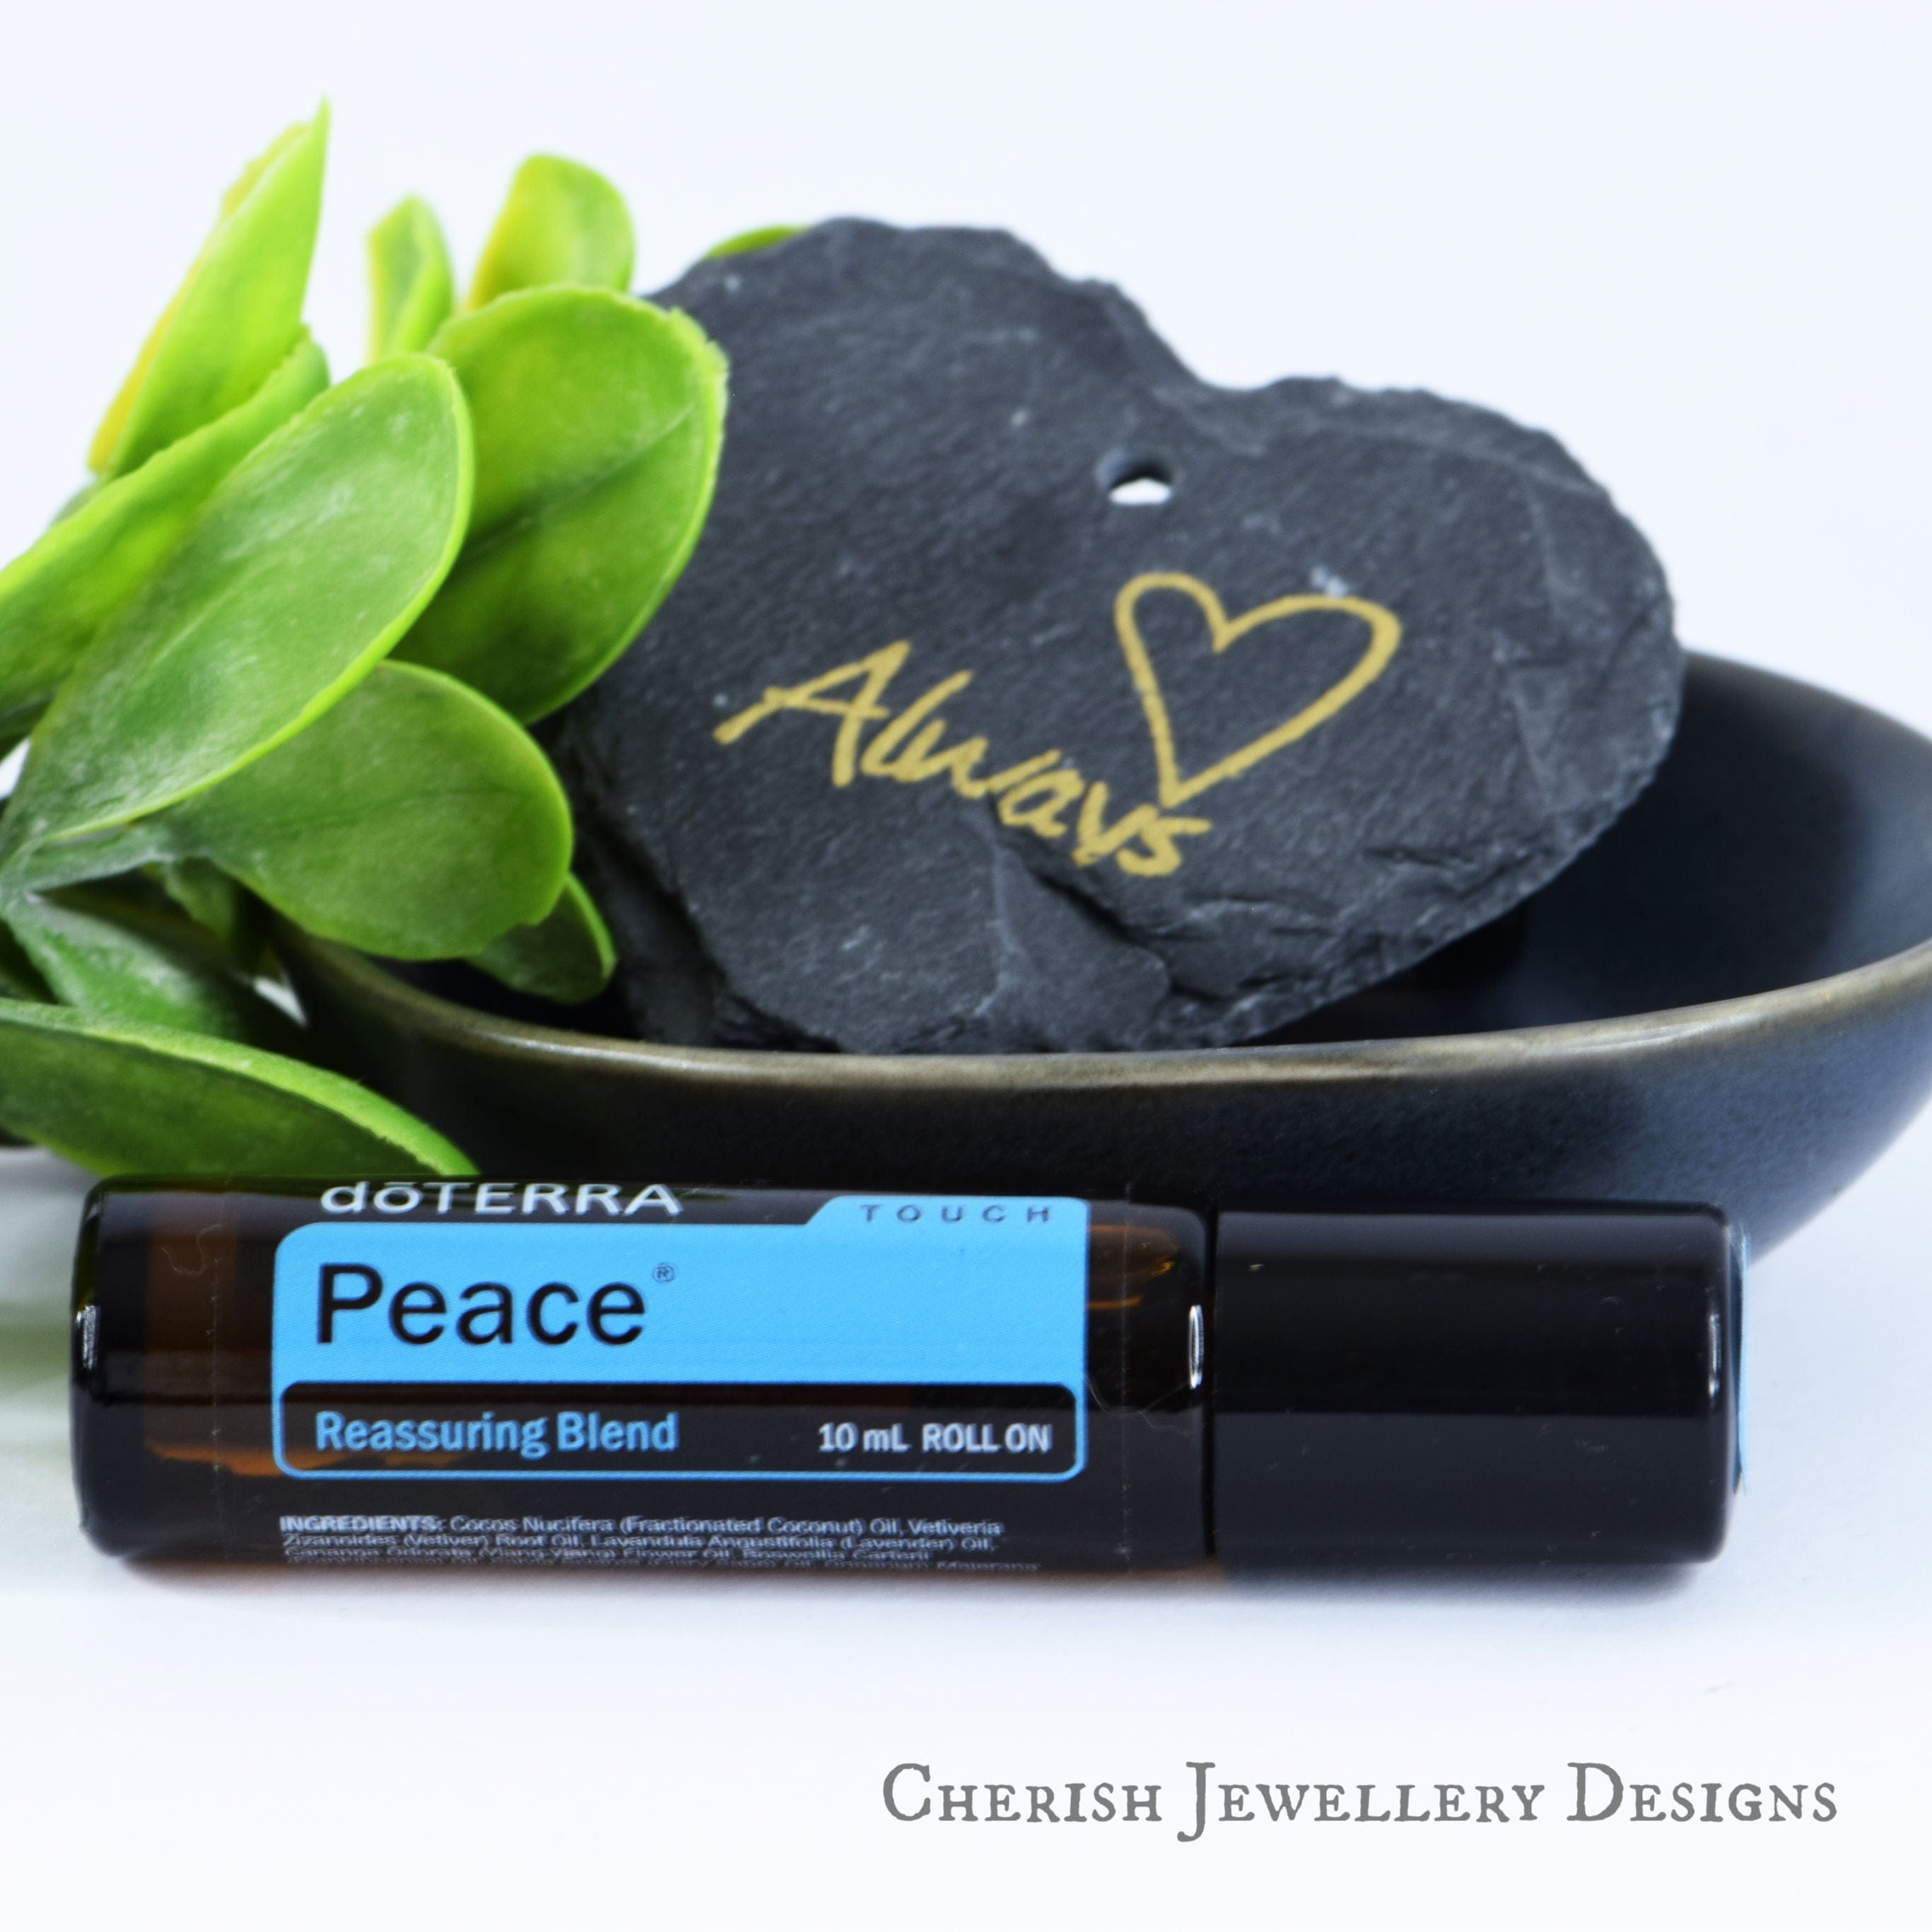 Peace Touch doTERRA Reassuring Blend